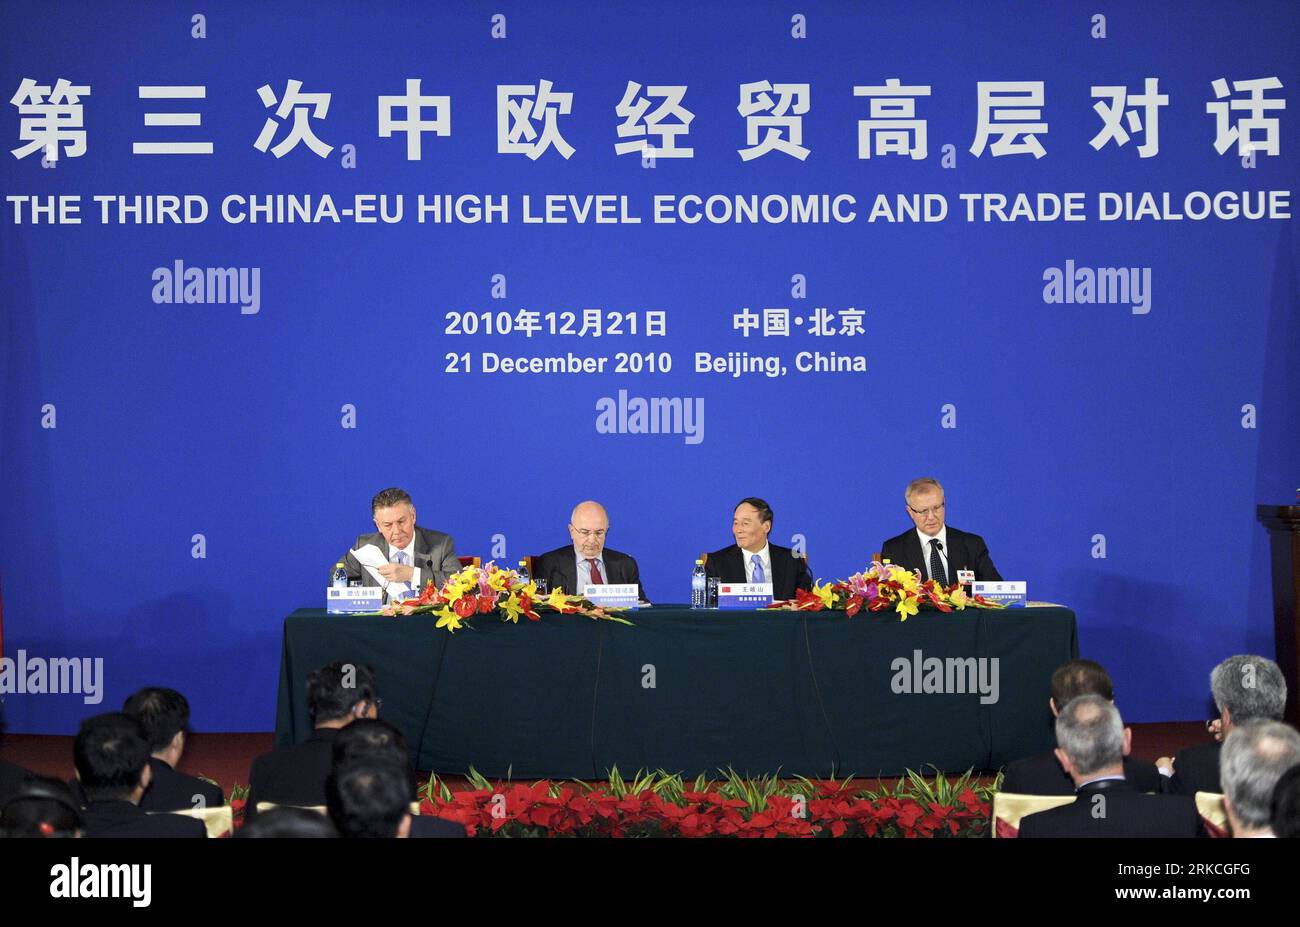 Bildnummer: 54764374  Datum: 21.12.2010  Copyright: imago/Xinhua (101221) -- BEIJING, Dec. 21, 2010 (Xinhua) -- Chinese Vice Premier Wang Qishan (2nd R), European Commission Vice President in charge of competition policy Joaquin Almunia (2nd L), Trade Commissioner Karel De Gucht (1st L) and Commissioner for Economic and Monetary Affairs Olli Rehn (1st R), attend the press conference on the Third China-EU High Level Economic and Trade Dialogue in Beijing, capital of China, Dec. 21, 2010. (Xinhua/Xie Huanchi) (wyo) CHINA-EU HIGH LEVEL ECONOMIC AND TRADE DIALOGUE-PRESS CONFERENCE (CN) PUBLICATION Stock Photo